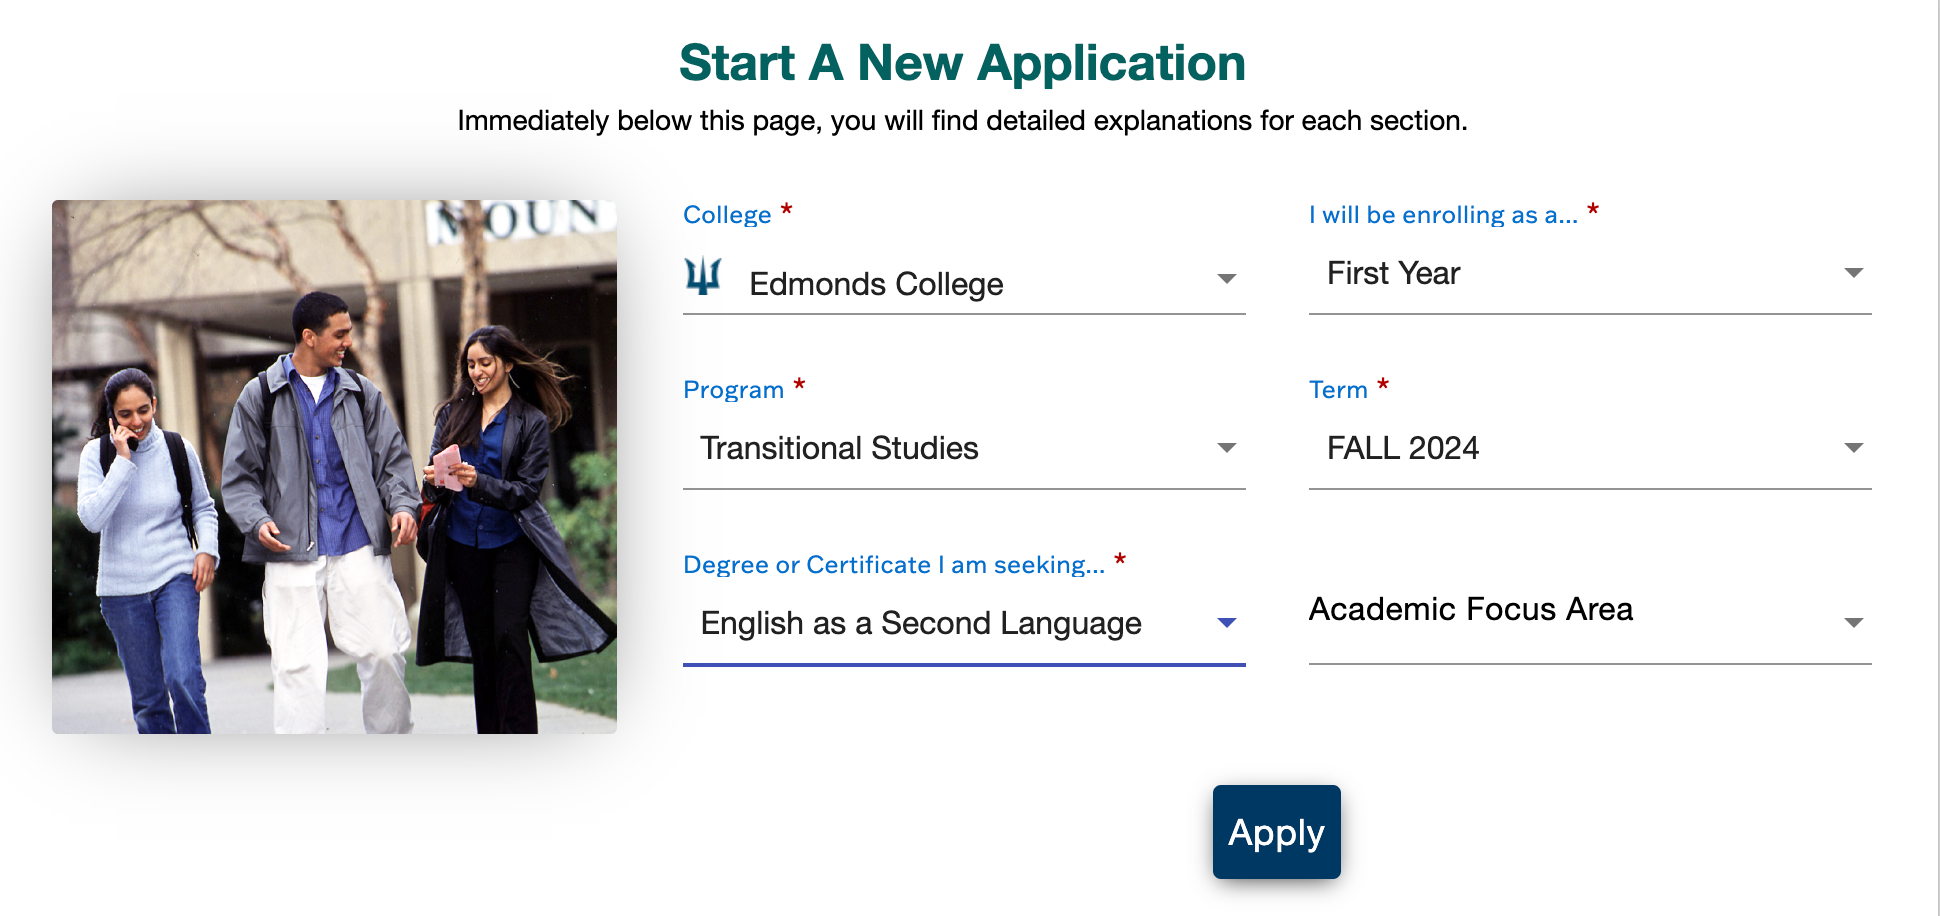 Screenshot of options to select on application